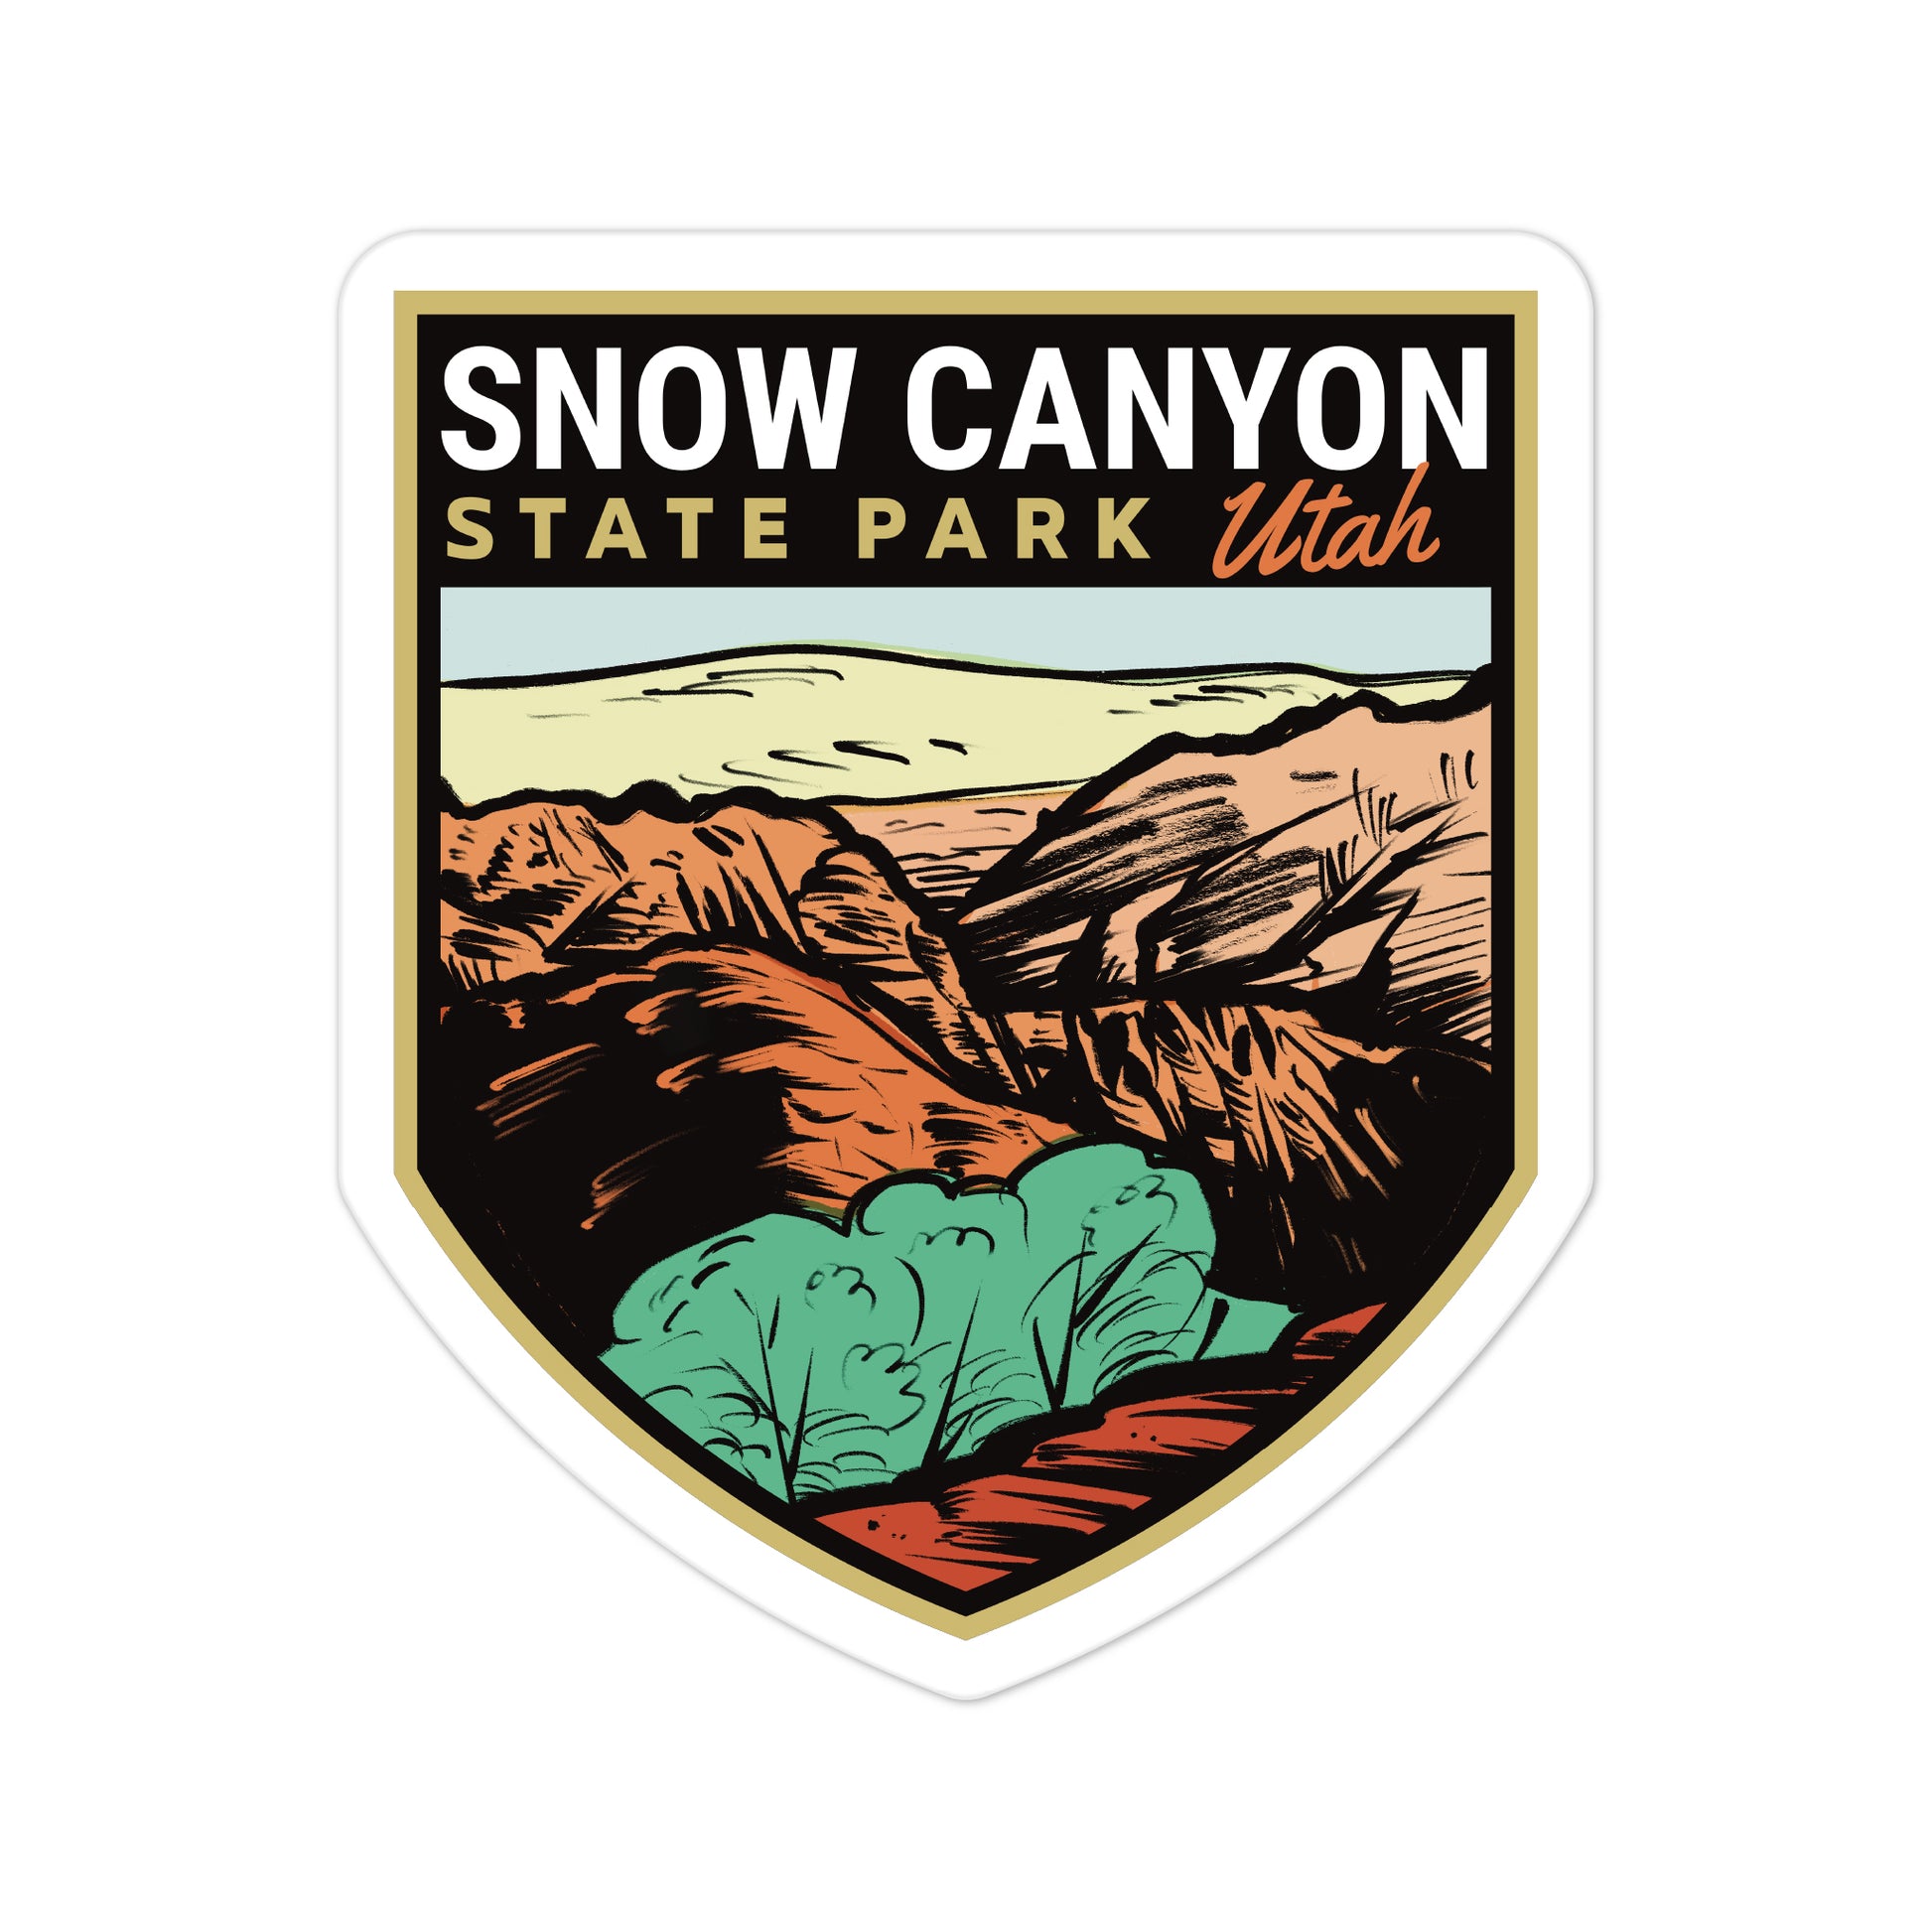 A sticker of Snow Canyon State Park